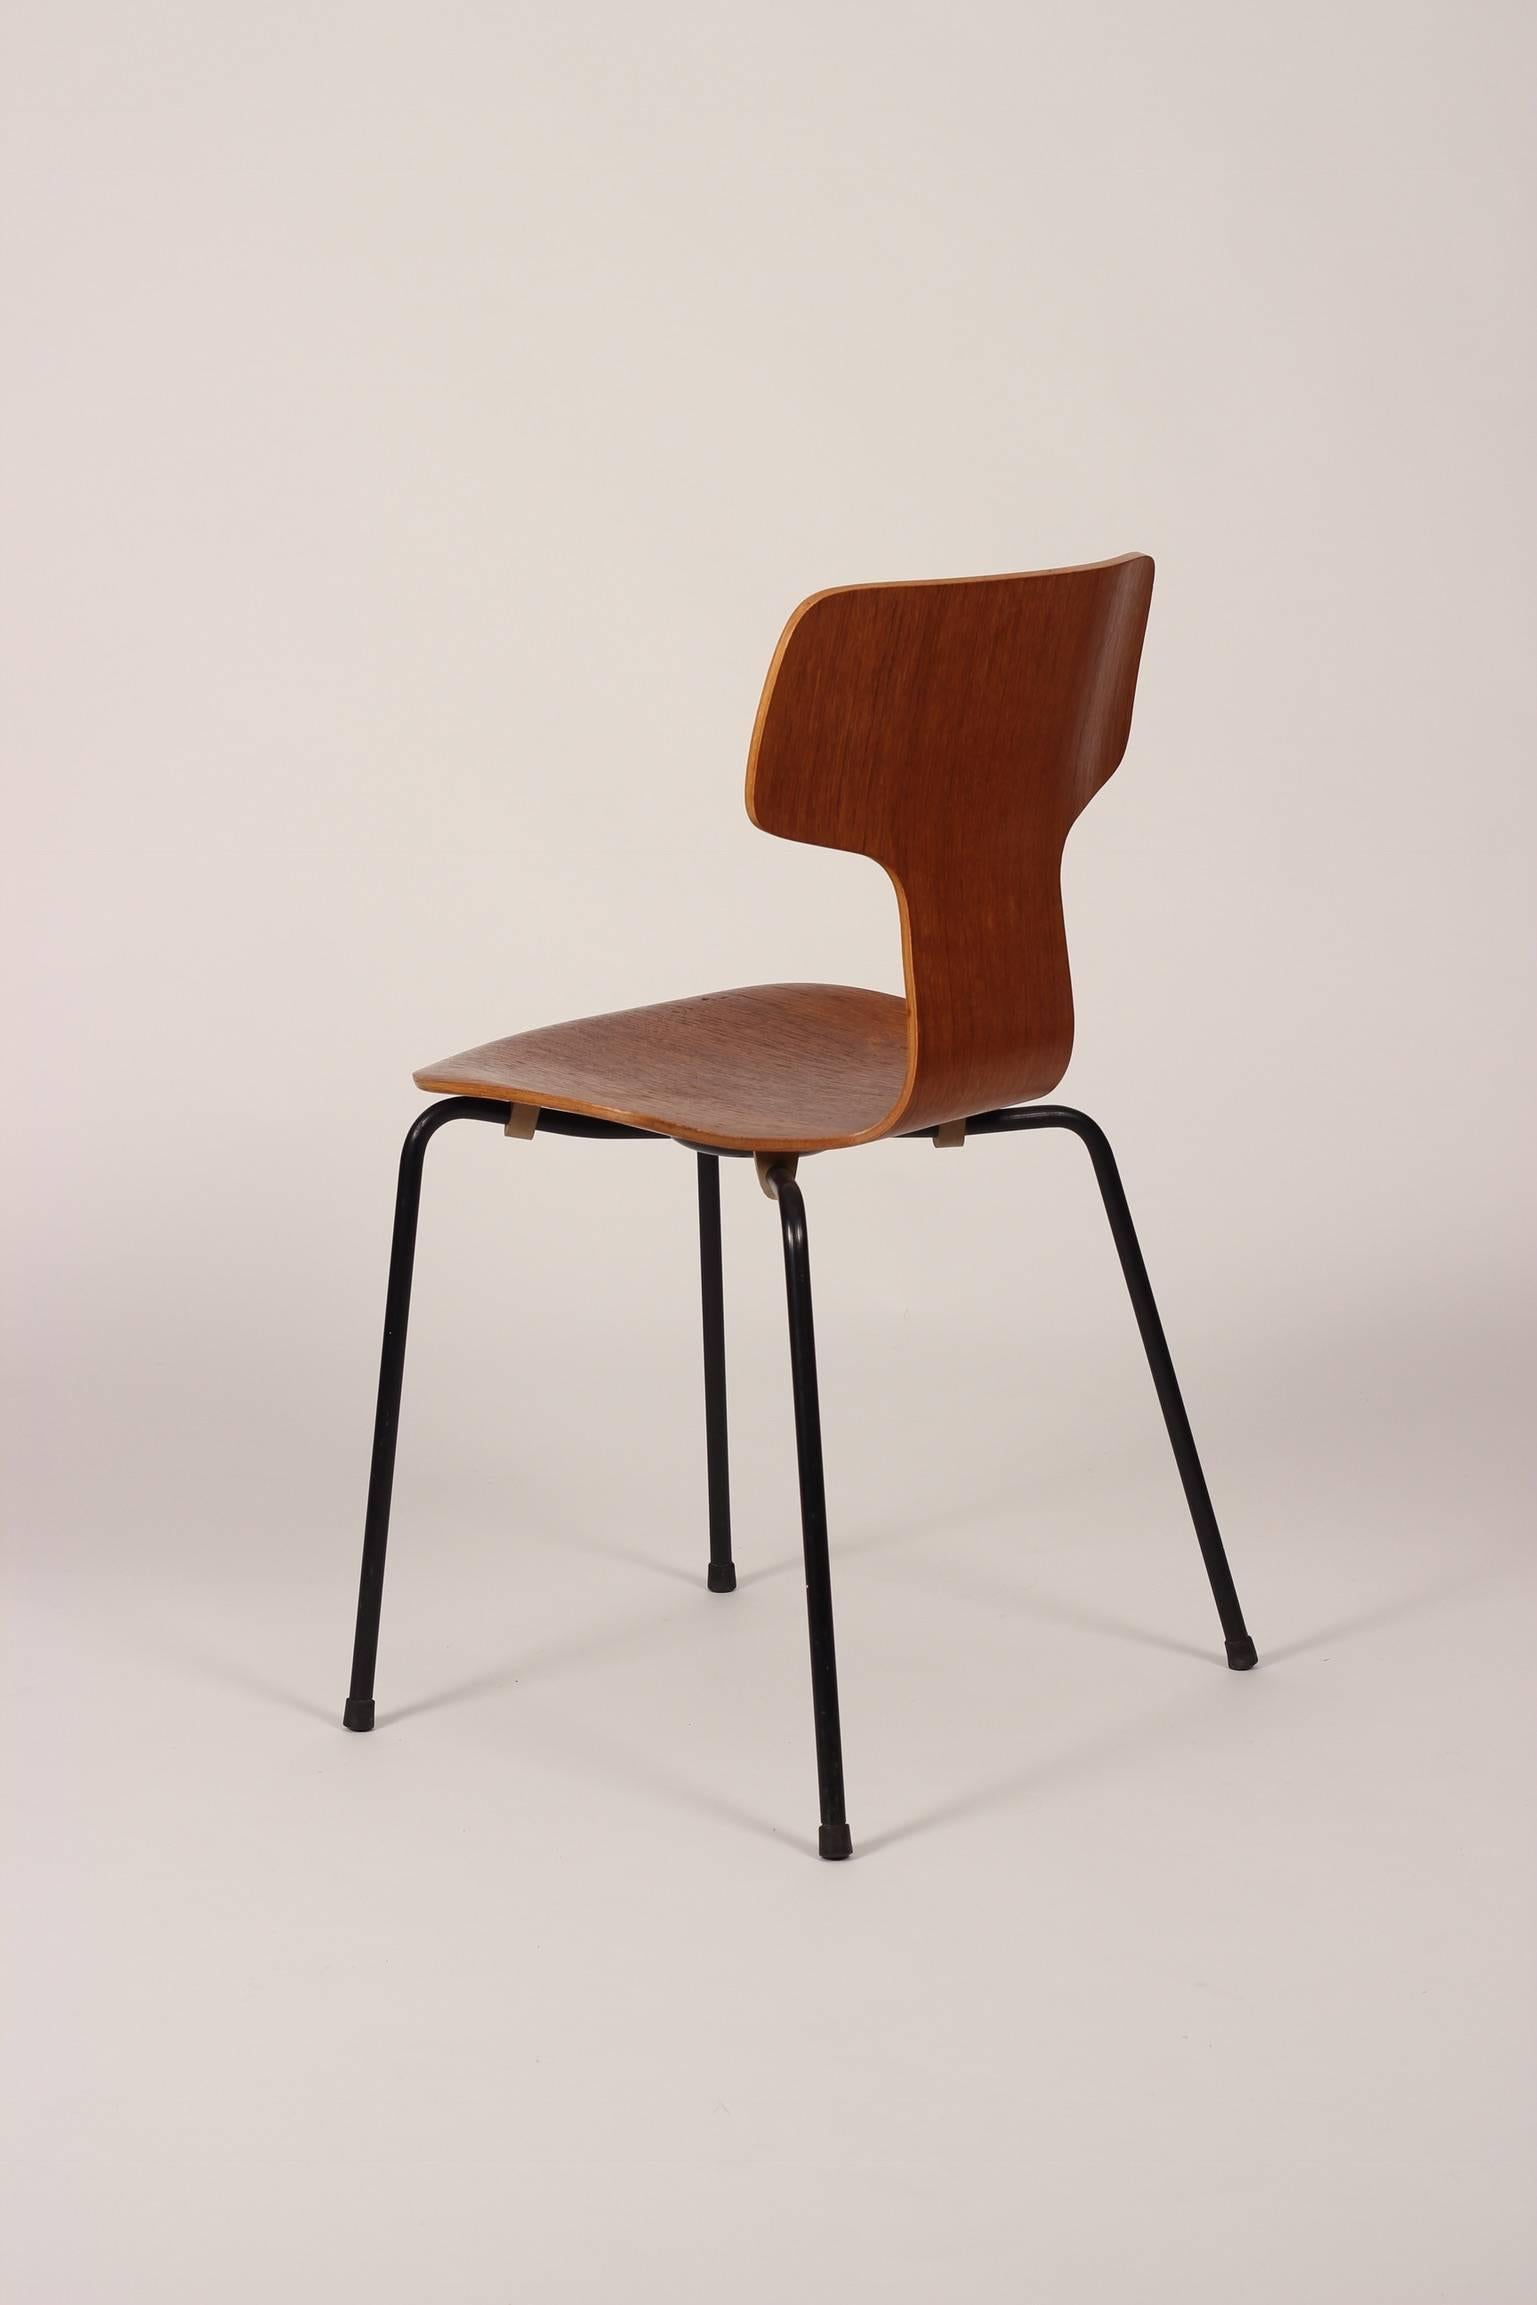 A set of eight teak T-Chairs model 3103 designed by Arne Jacobsen in 1957 for Fritz Hansen. These Danish Mid-Century Modern dining chairs, original early editions in excellent vintage condition. Like its predecessors the Ant chair and series 7